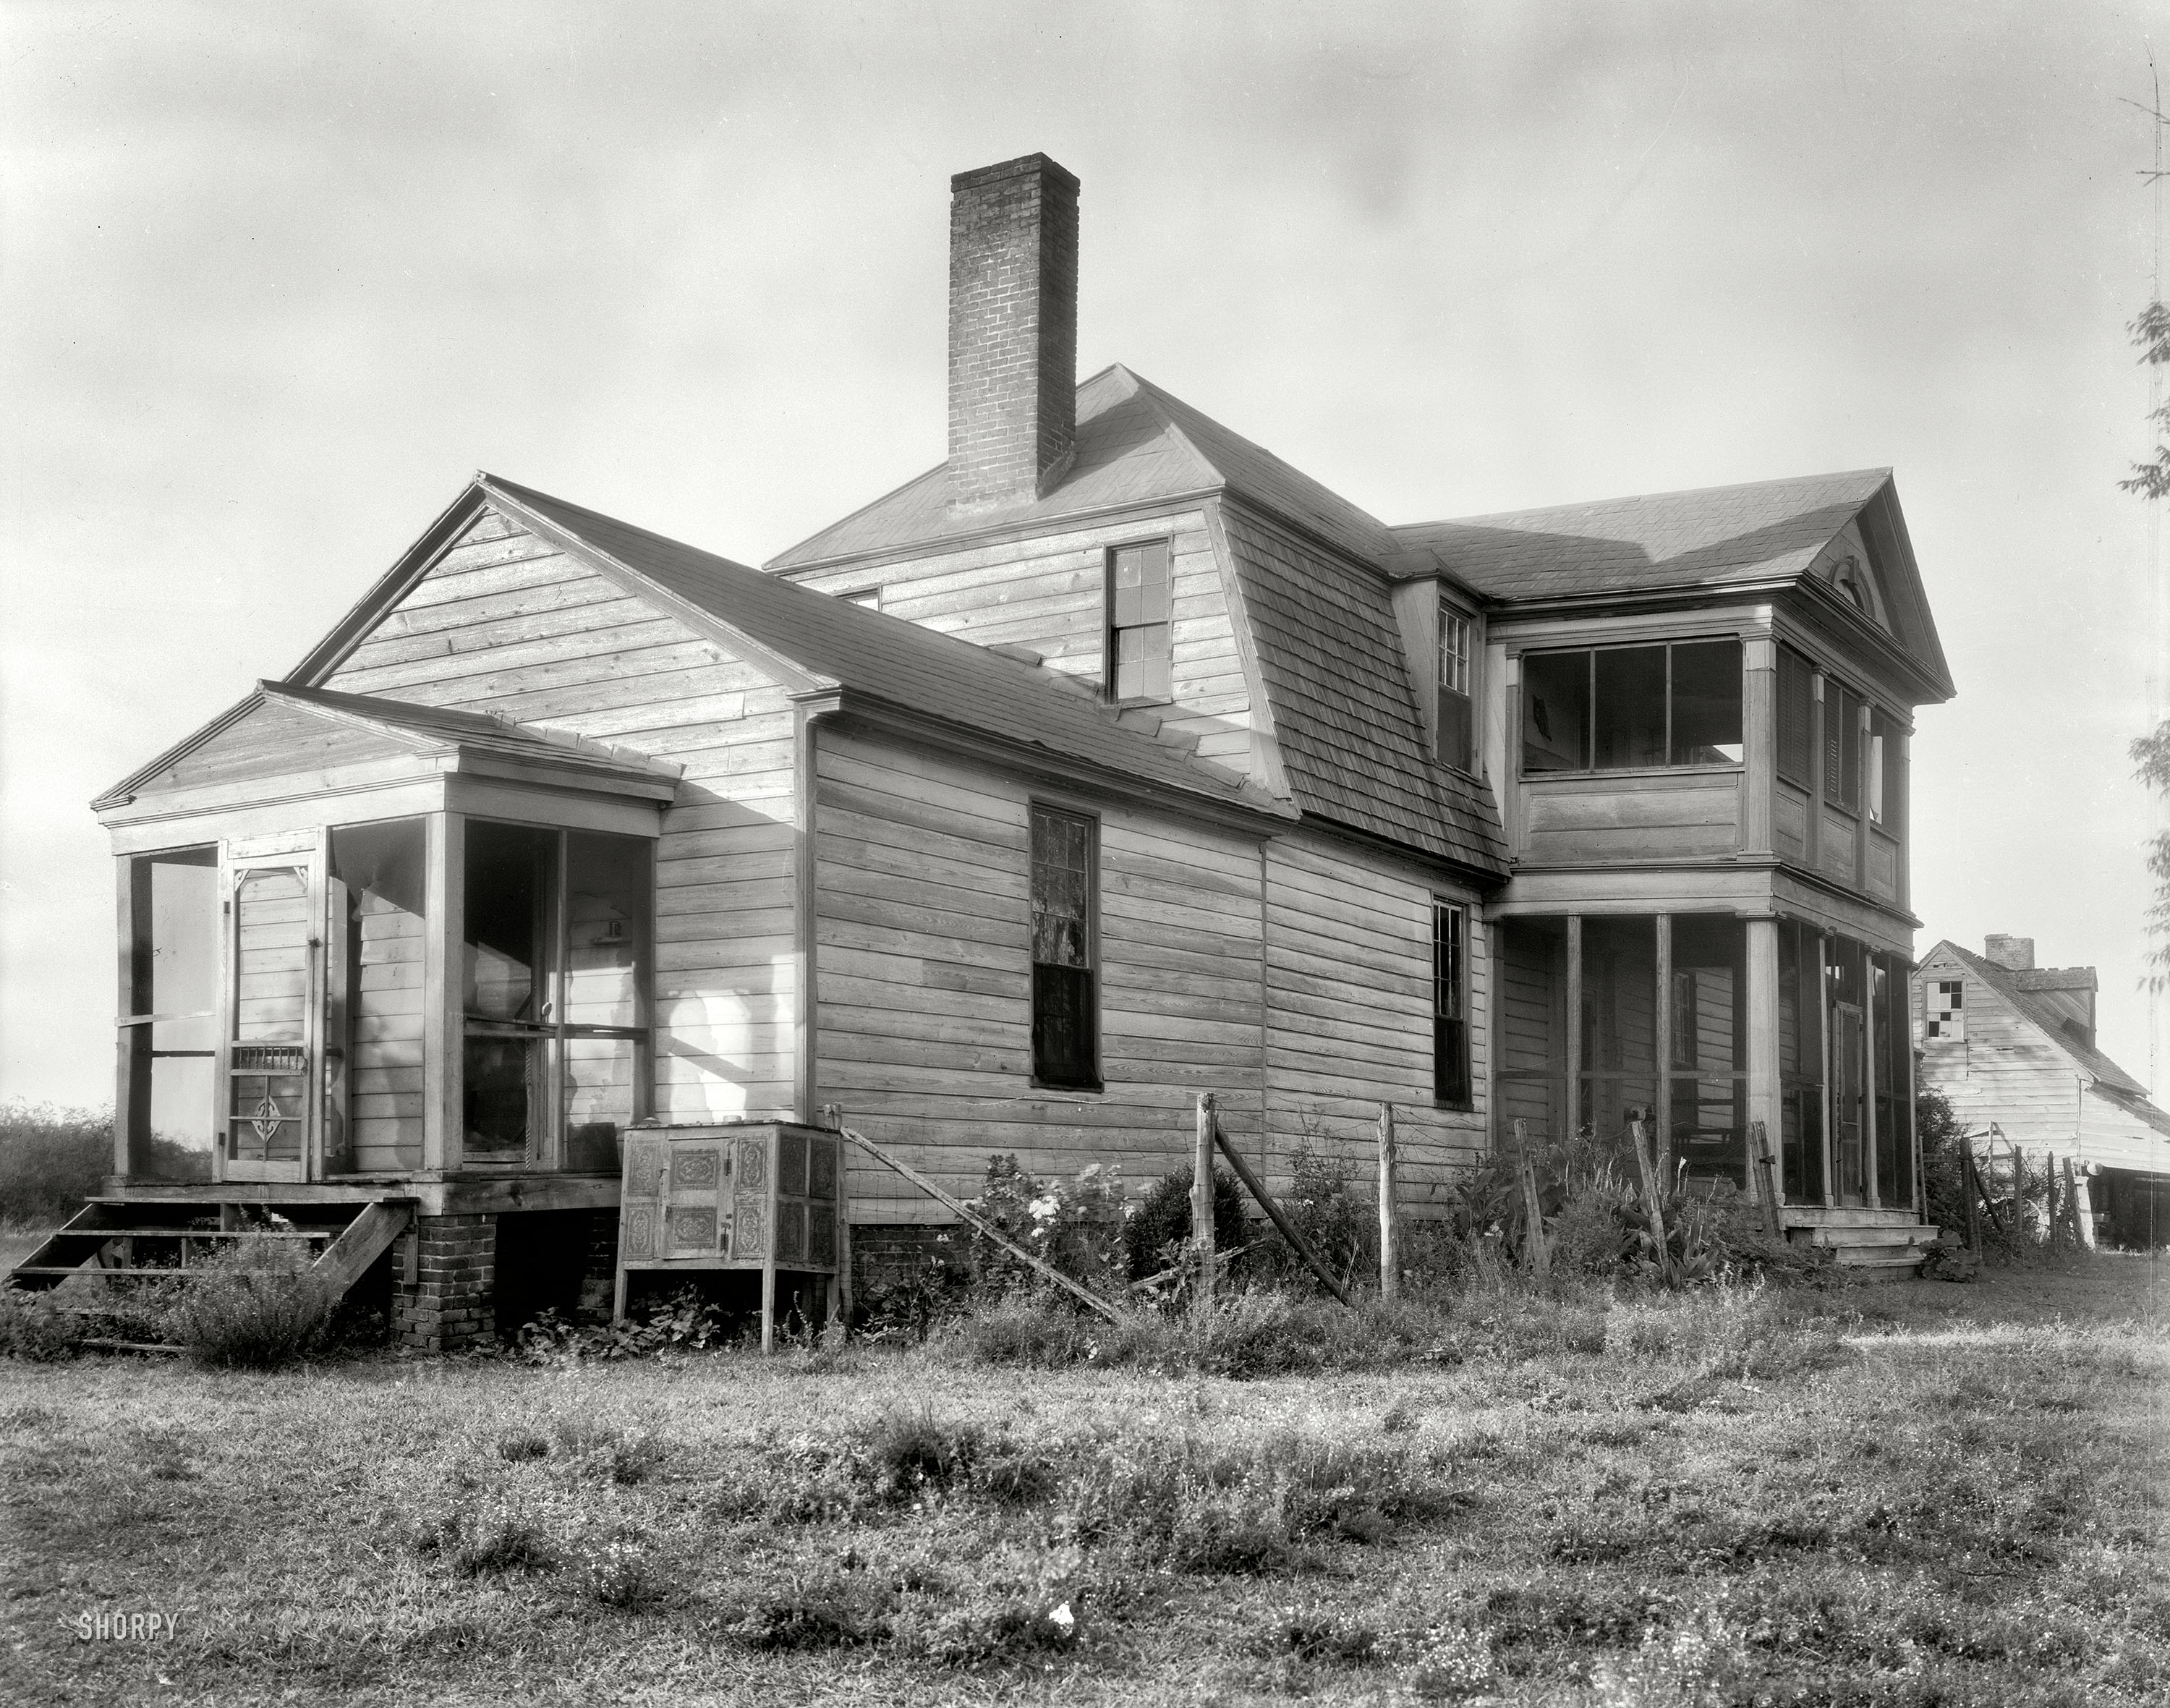 Charles City County, Virginia, circa 1935. "Toma Hund, Barrett's Ferry vicinity." Gambrel roof, double-decker portico and a curiously Germanic sounding name. 8x10 inch acetate negative by Frances Benjamin Johnston. View full size.